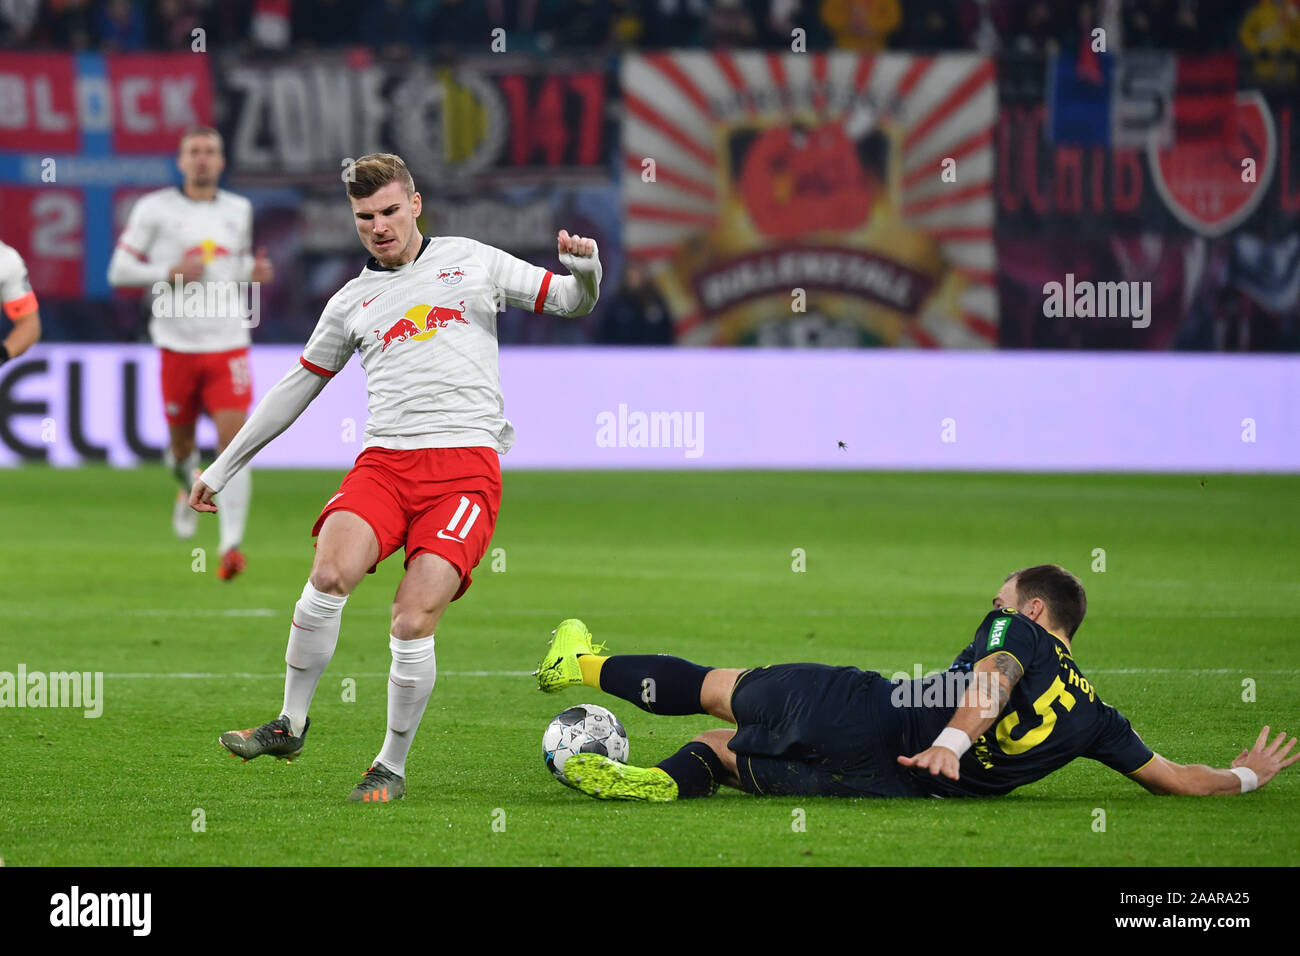 Leipzig, Germany. 23rd Nov, 2019. Emil FORSBERG (L), action, duels versus Rafael CZICHOS (1.FC Cologne). Soccer 1. Bundesliga, 12.matchday, matchday12, RB Leipzig (L) - 1.FC Cologne (K) 4-1, on 23/11/2019 in LEIPZIG, REDBULLARENA, DFL REGULATIONS PROHIBIT ANY USE OF PHOTOGRAPHS AS IMAGE SEQUENCES AND/OR QUASI-VIDEO. | usage worldwide Credit: dpa/Alamy Live News Stock Photo